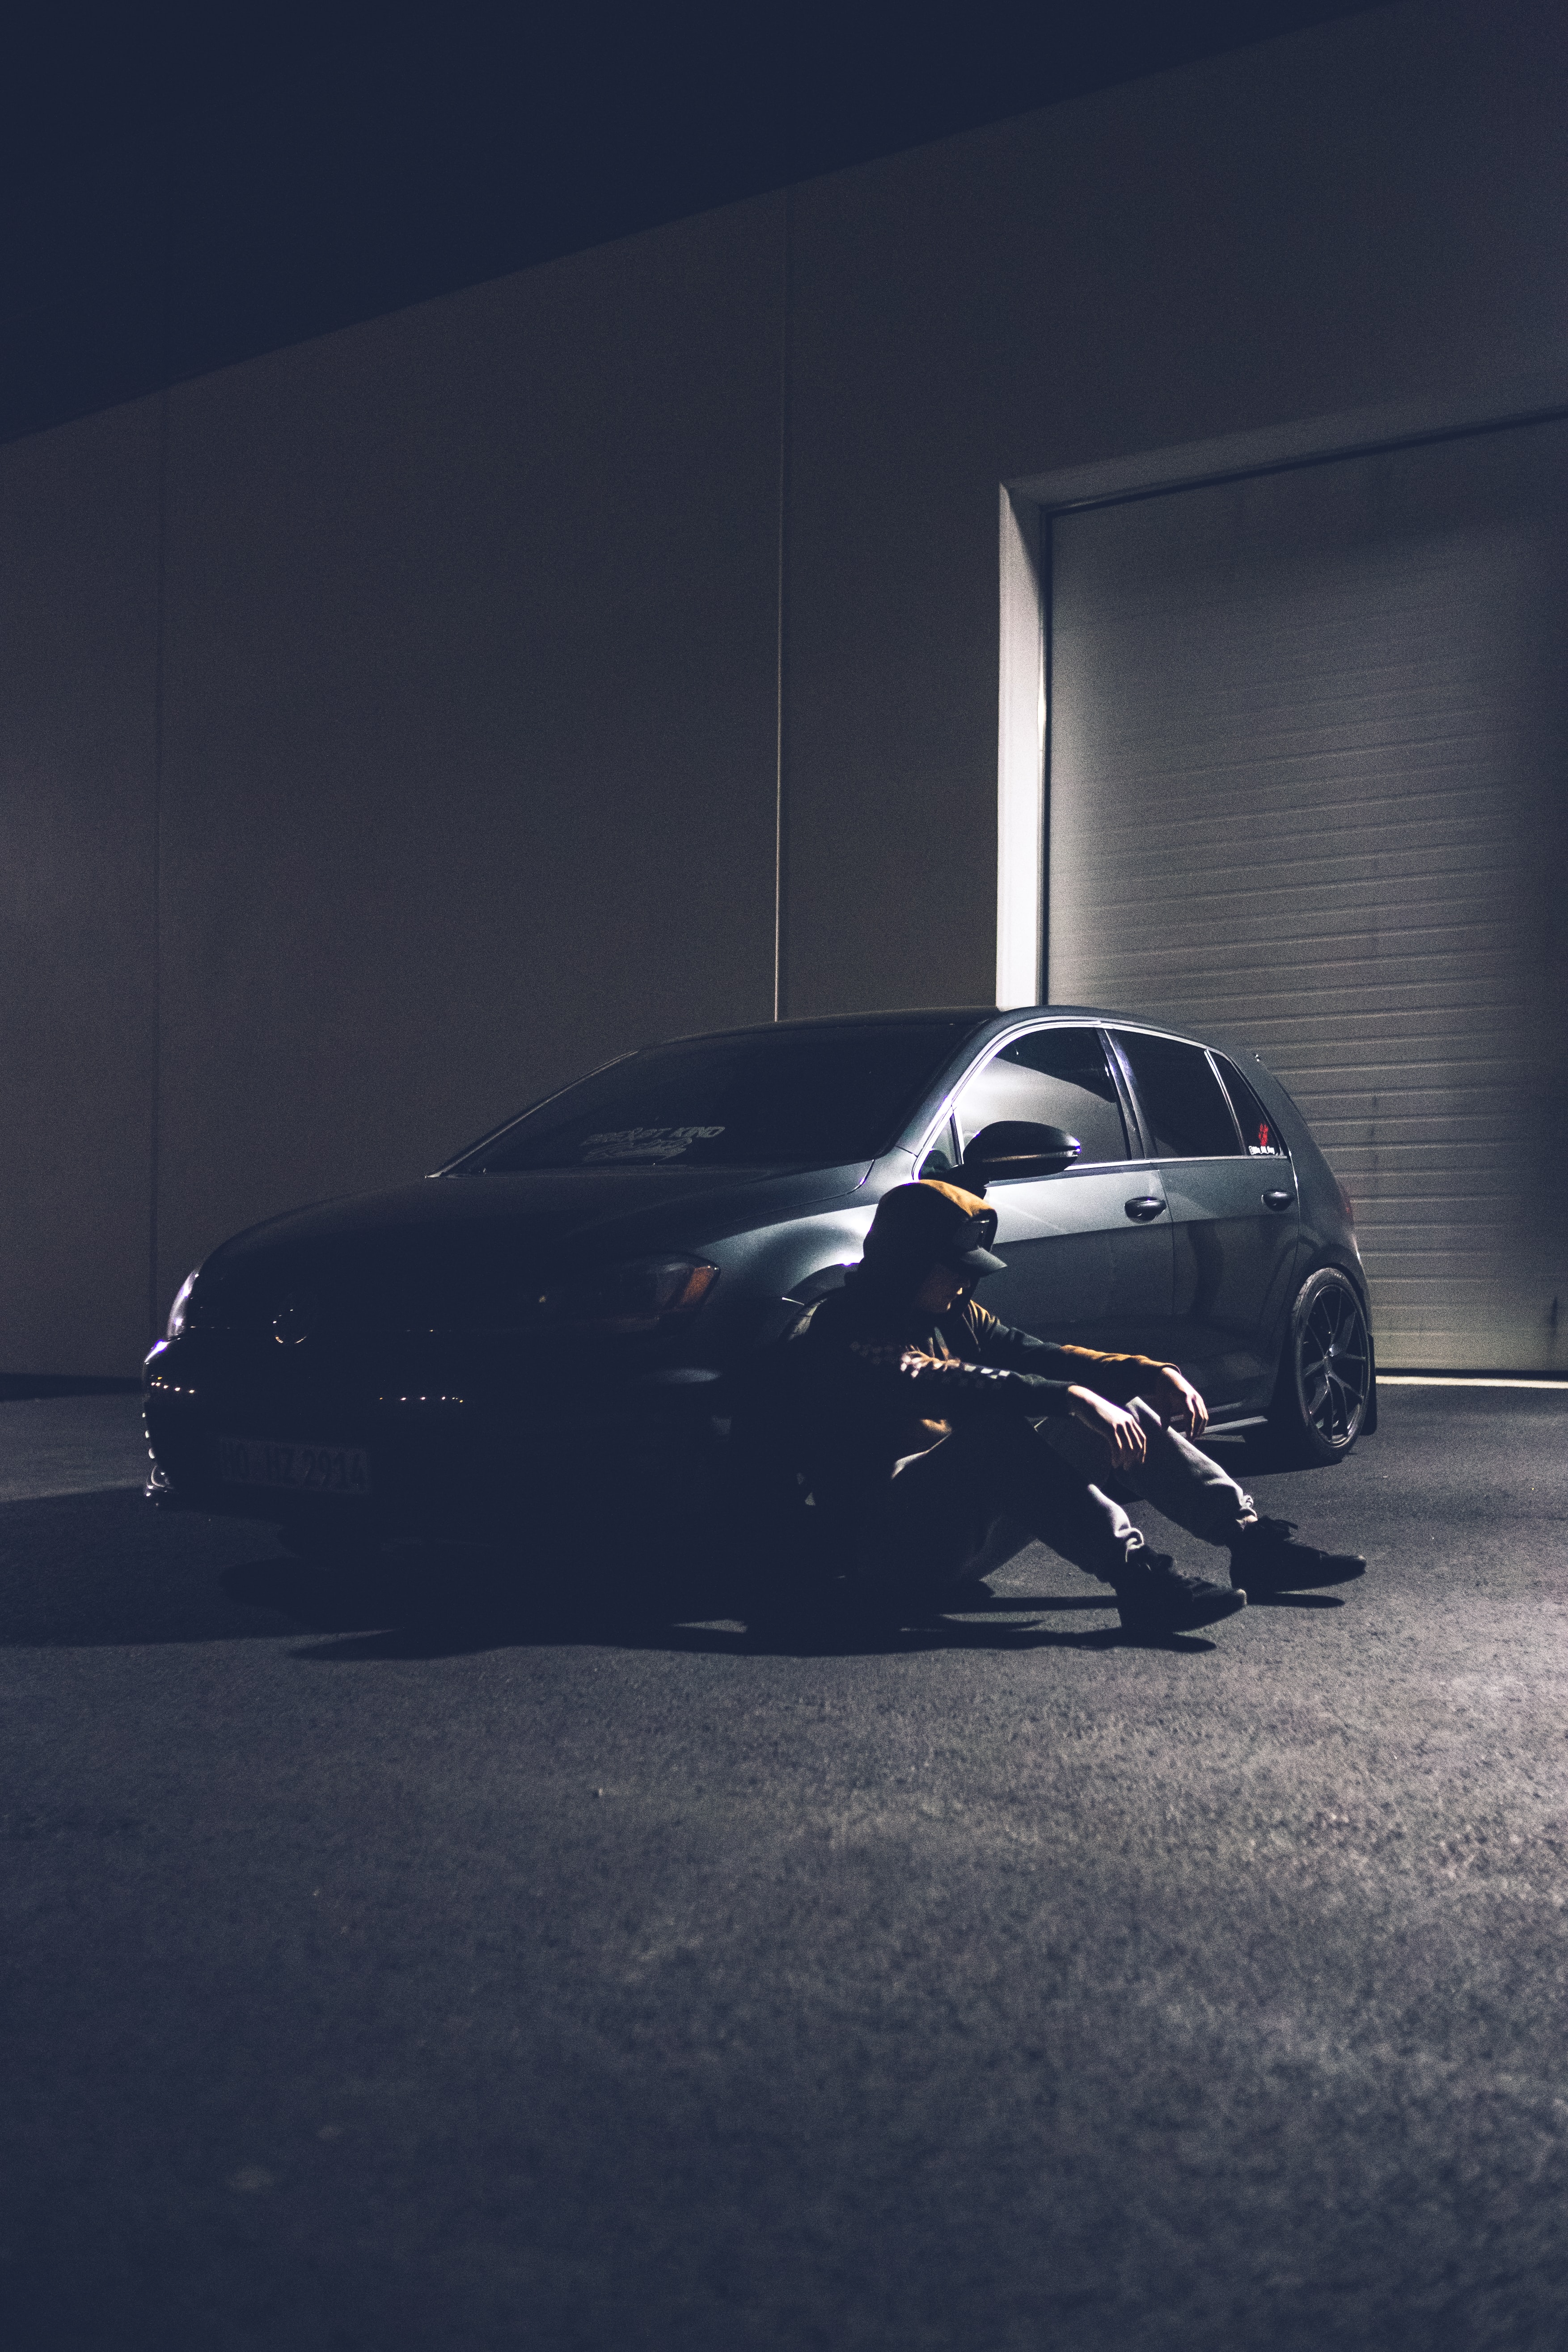 loneliness, sadness, alone, cars, car, machine, cap, lonely, sorrow Phone Background